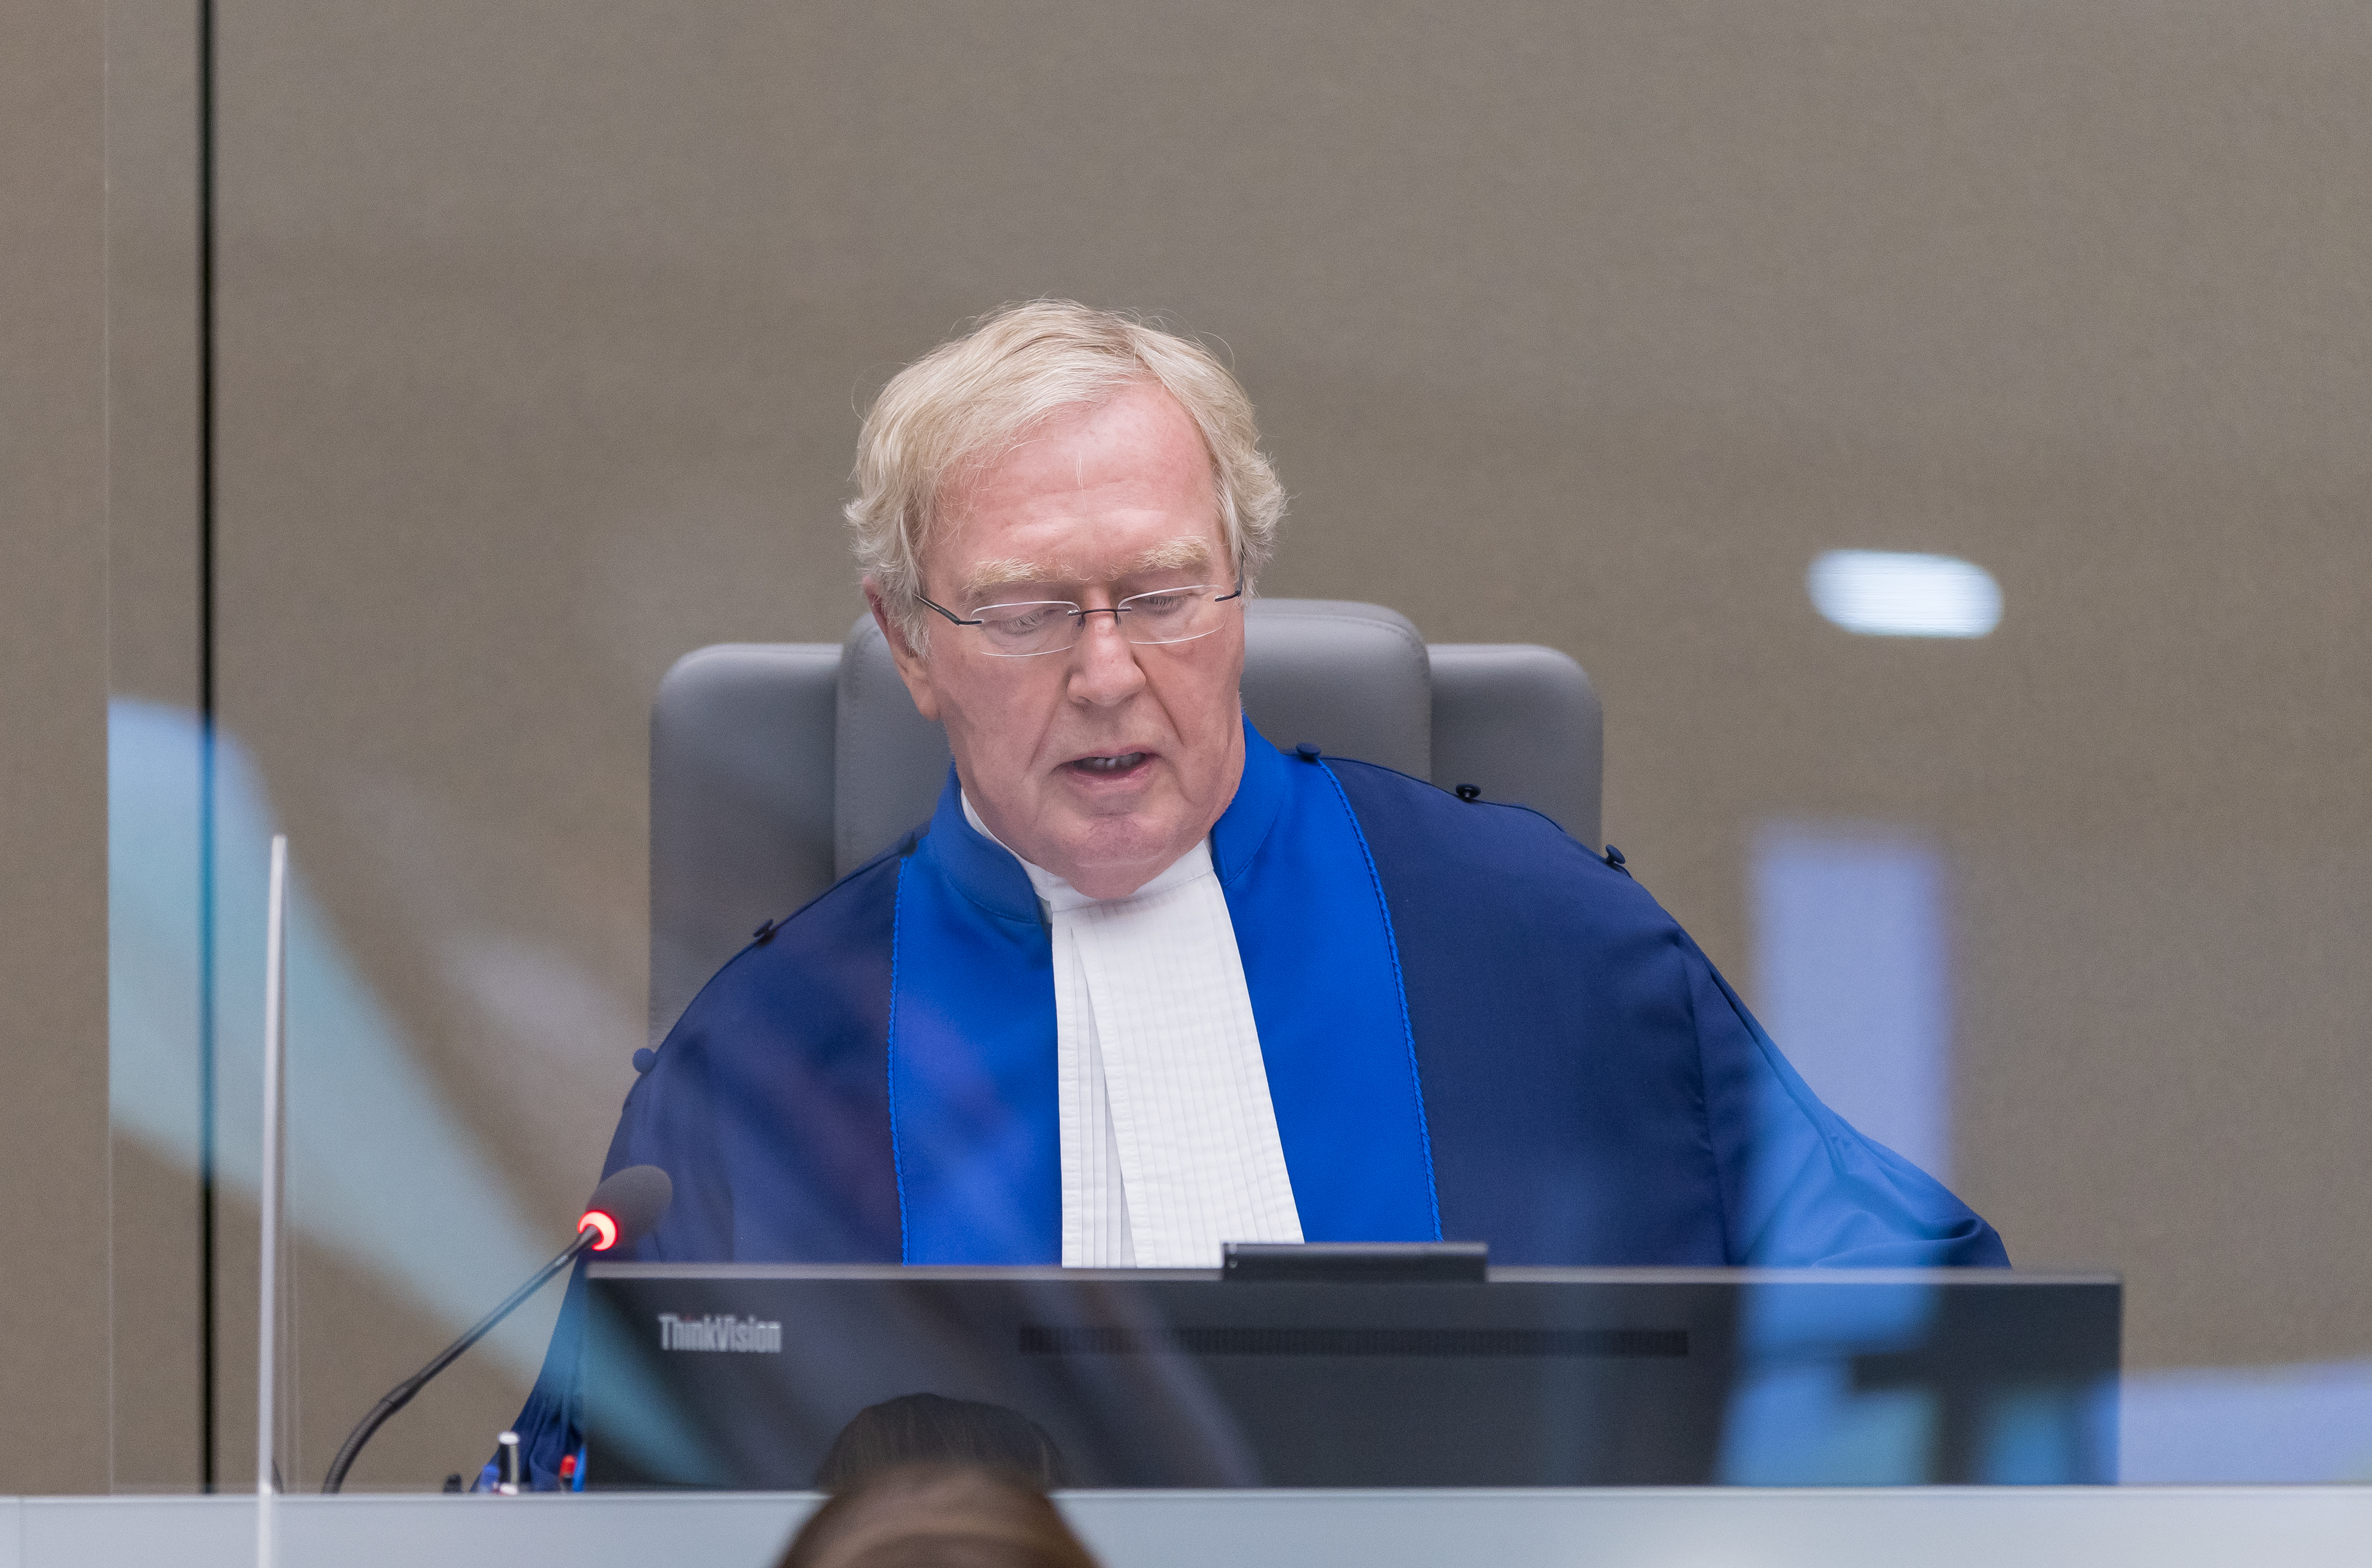 ICC Judge Howard Morrison, Presiding Judge in these appeals, reading the summary of the Appeals judgments on the verdict and sentence in the Ntaganda case ©ICC-CPI